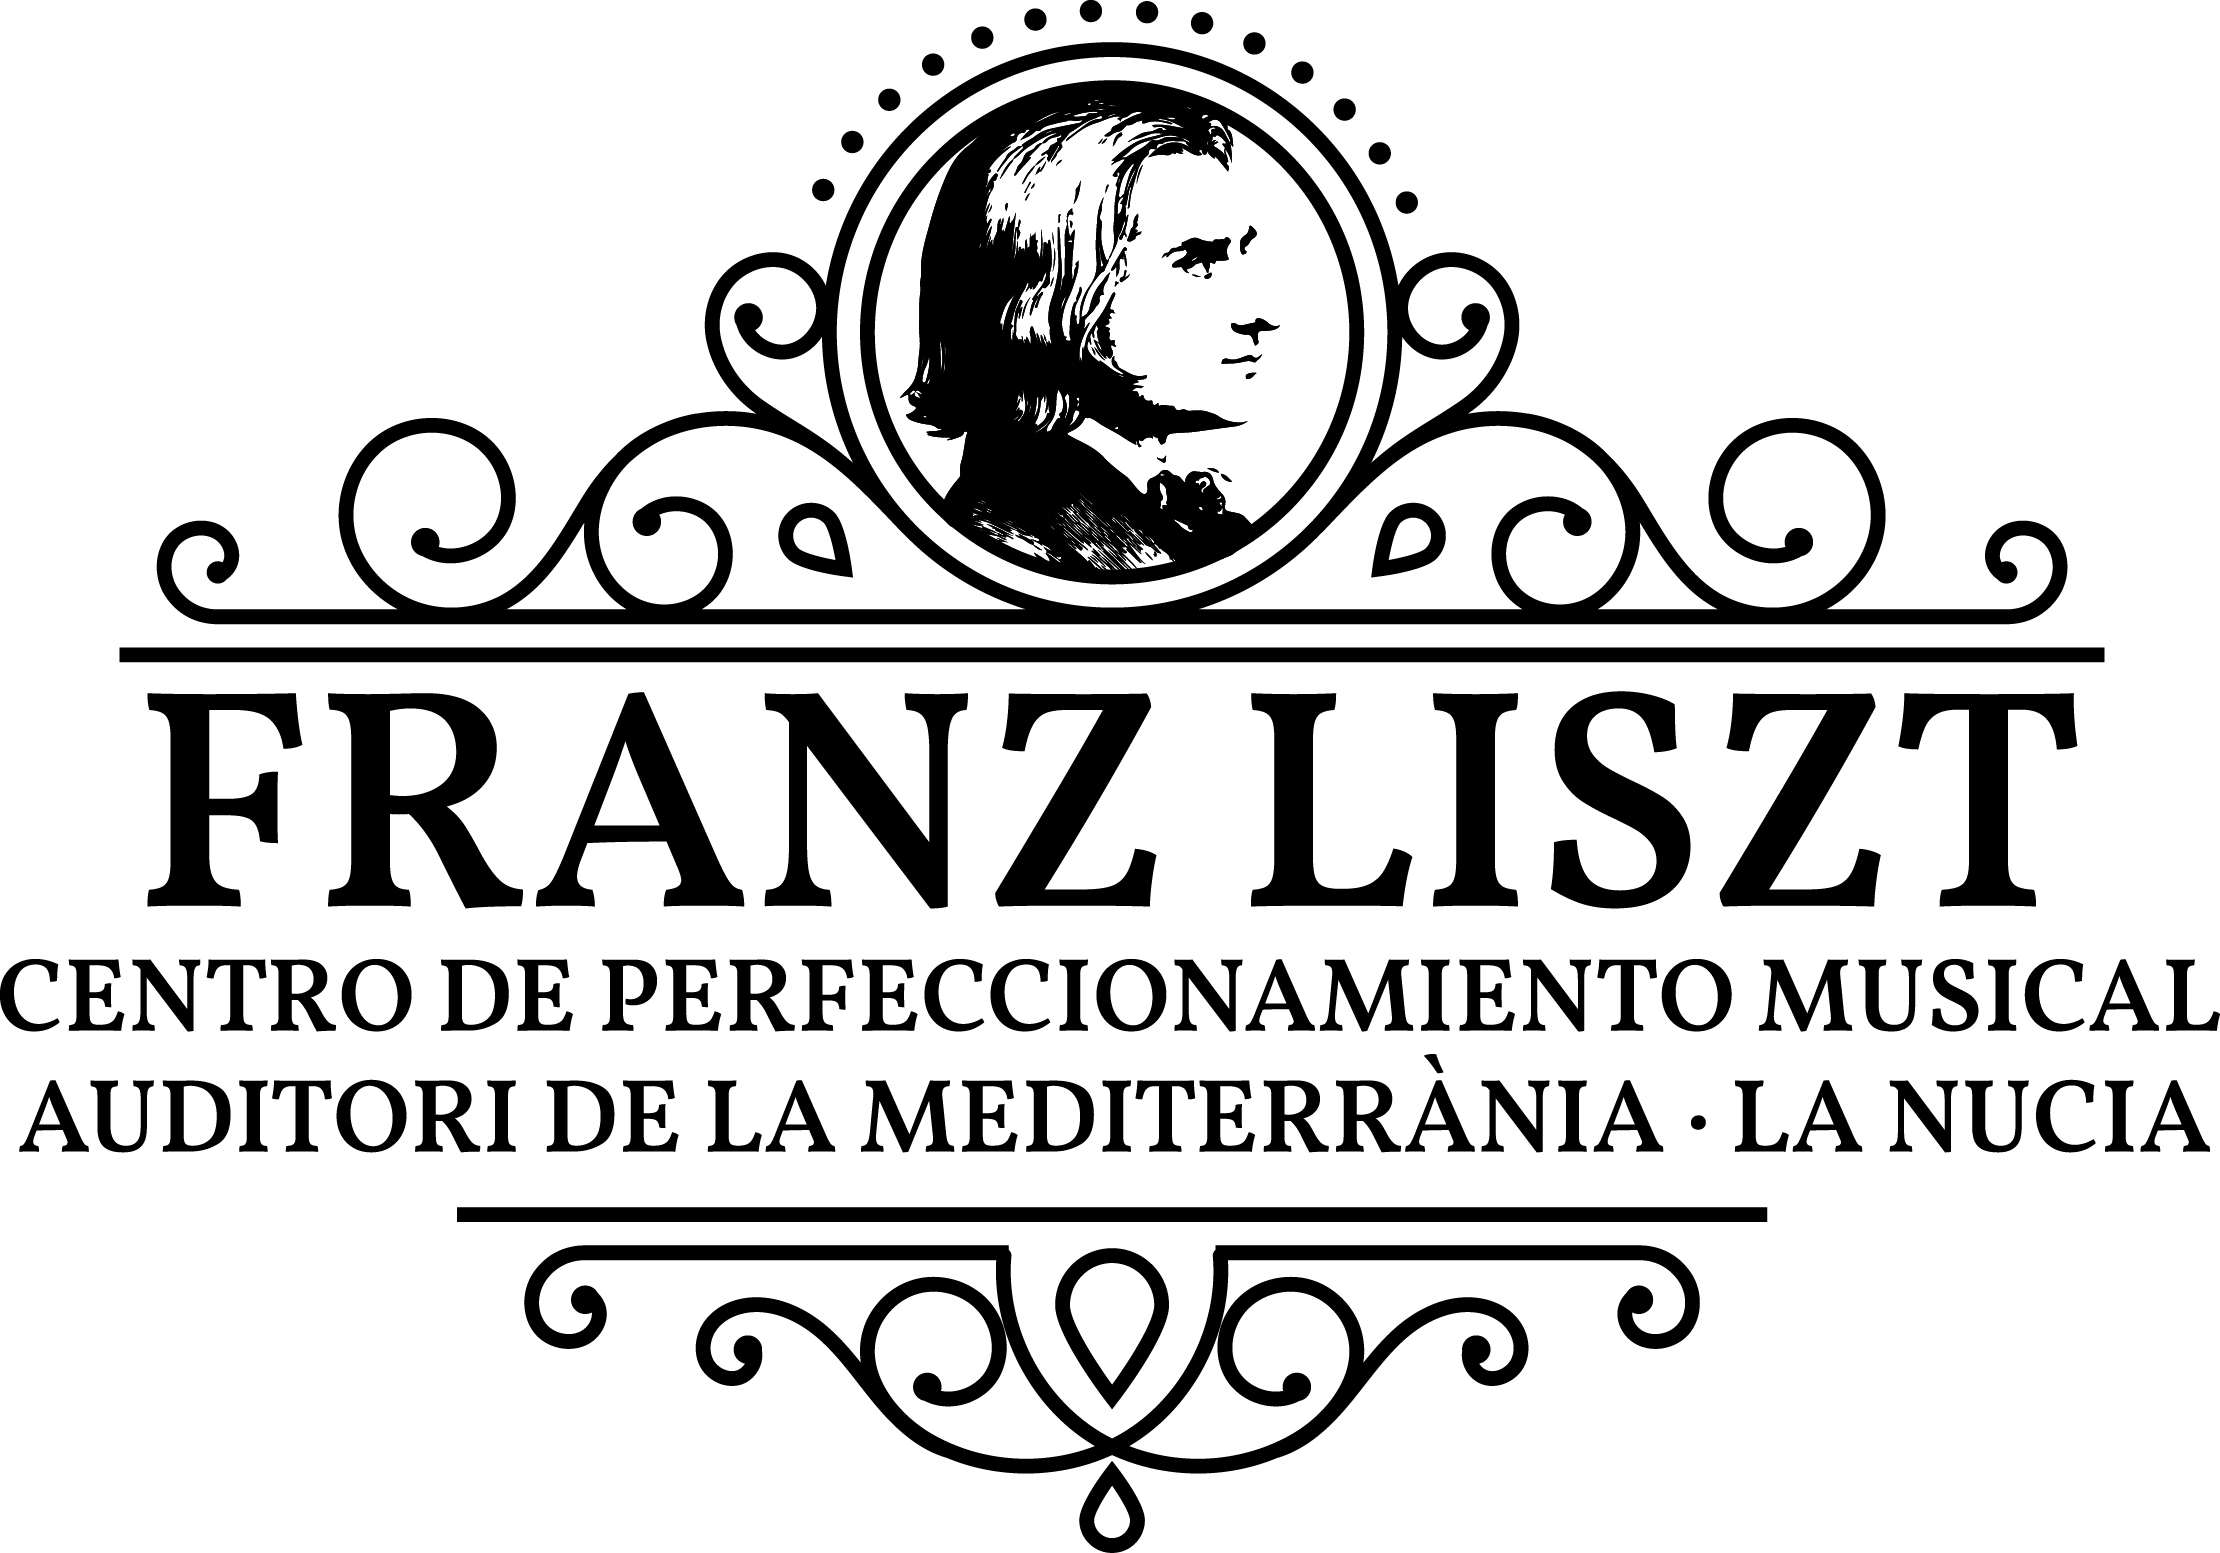 Welcome to the Franz Liszt Center